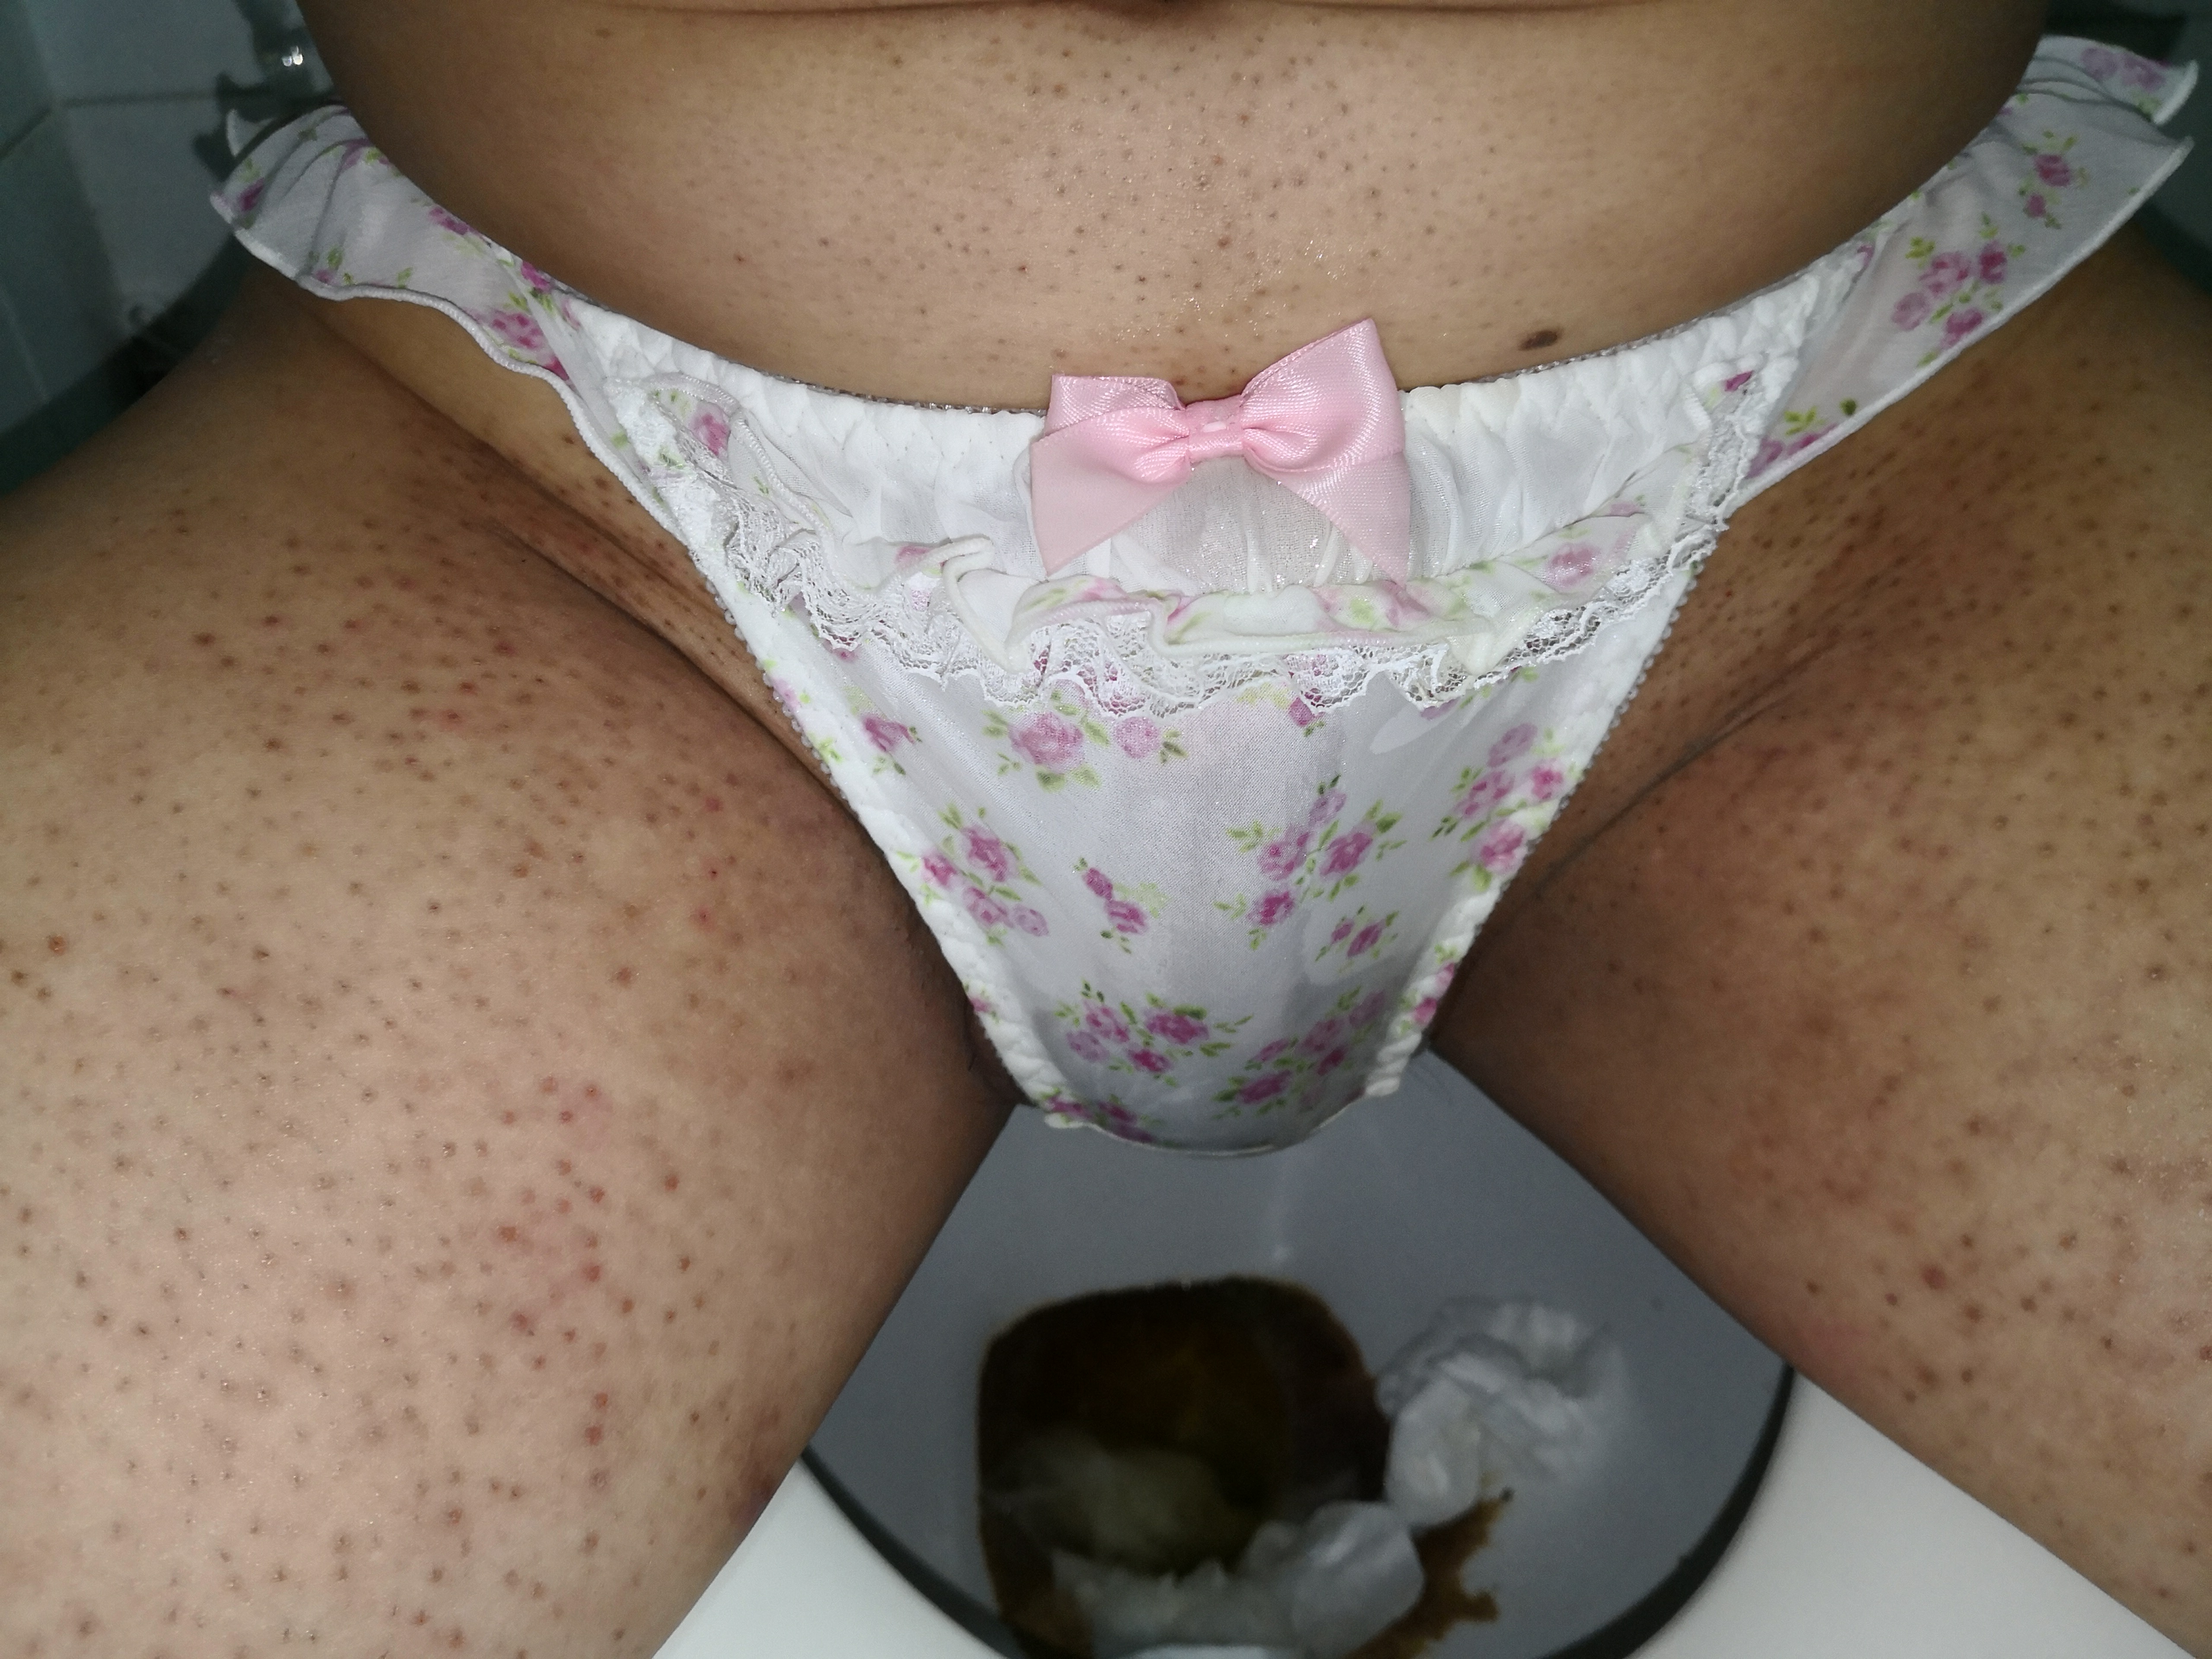 Wetting this lovely white flower pattern panty.